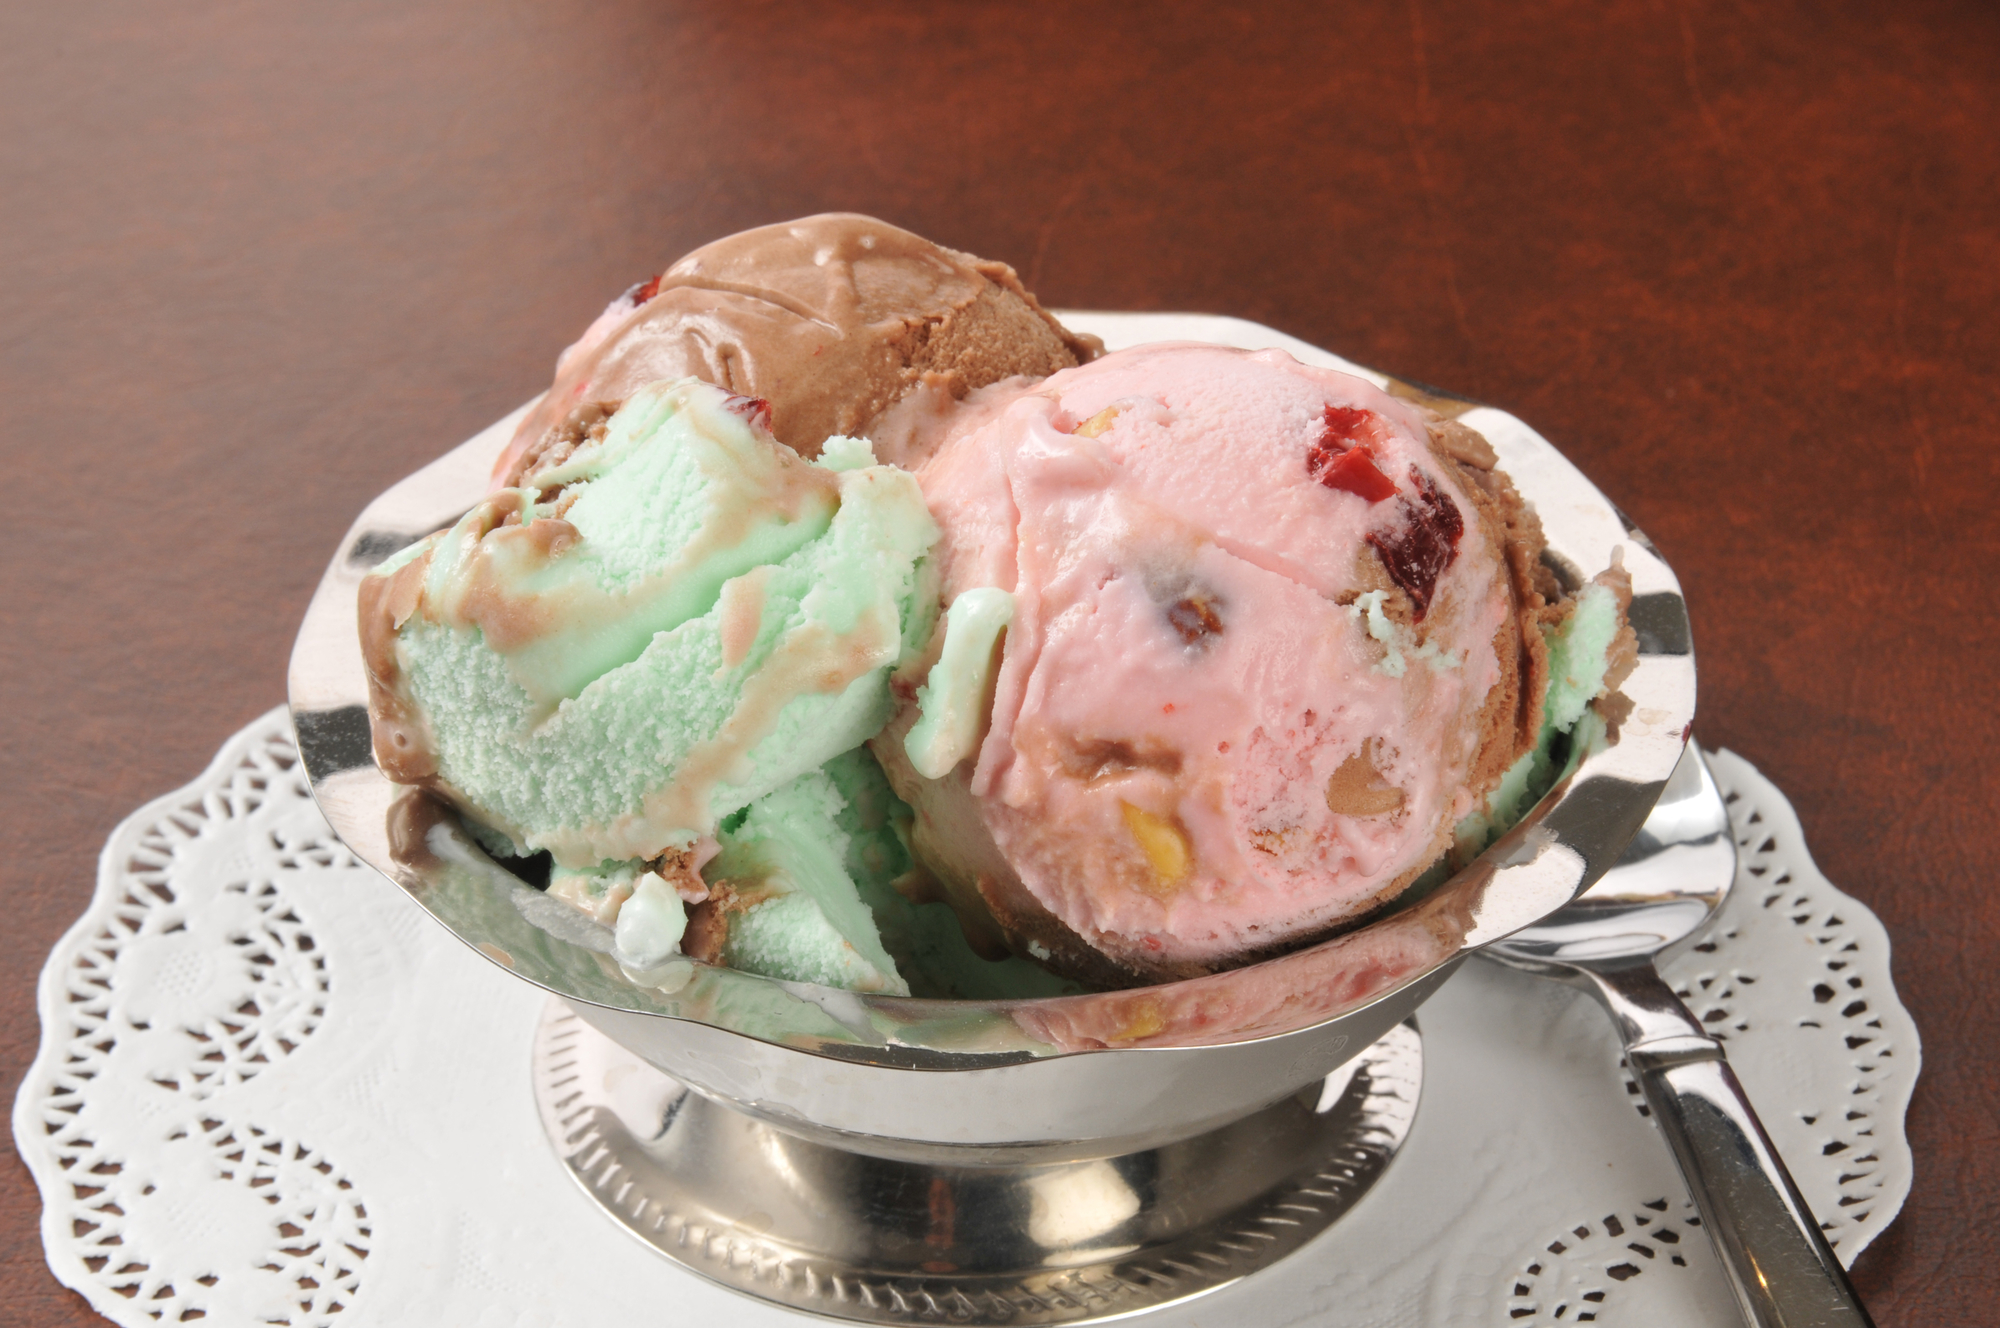 Indulge with a Delicious Holiday Flavor like Spumoni